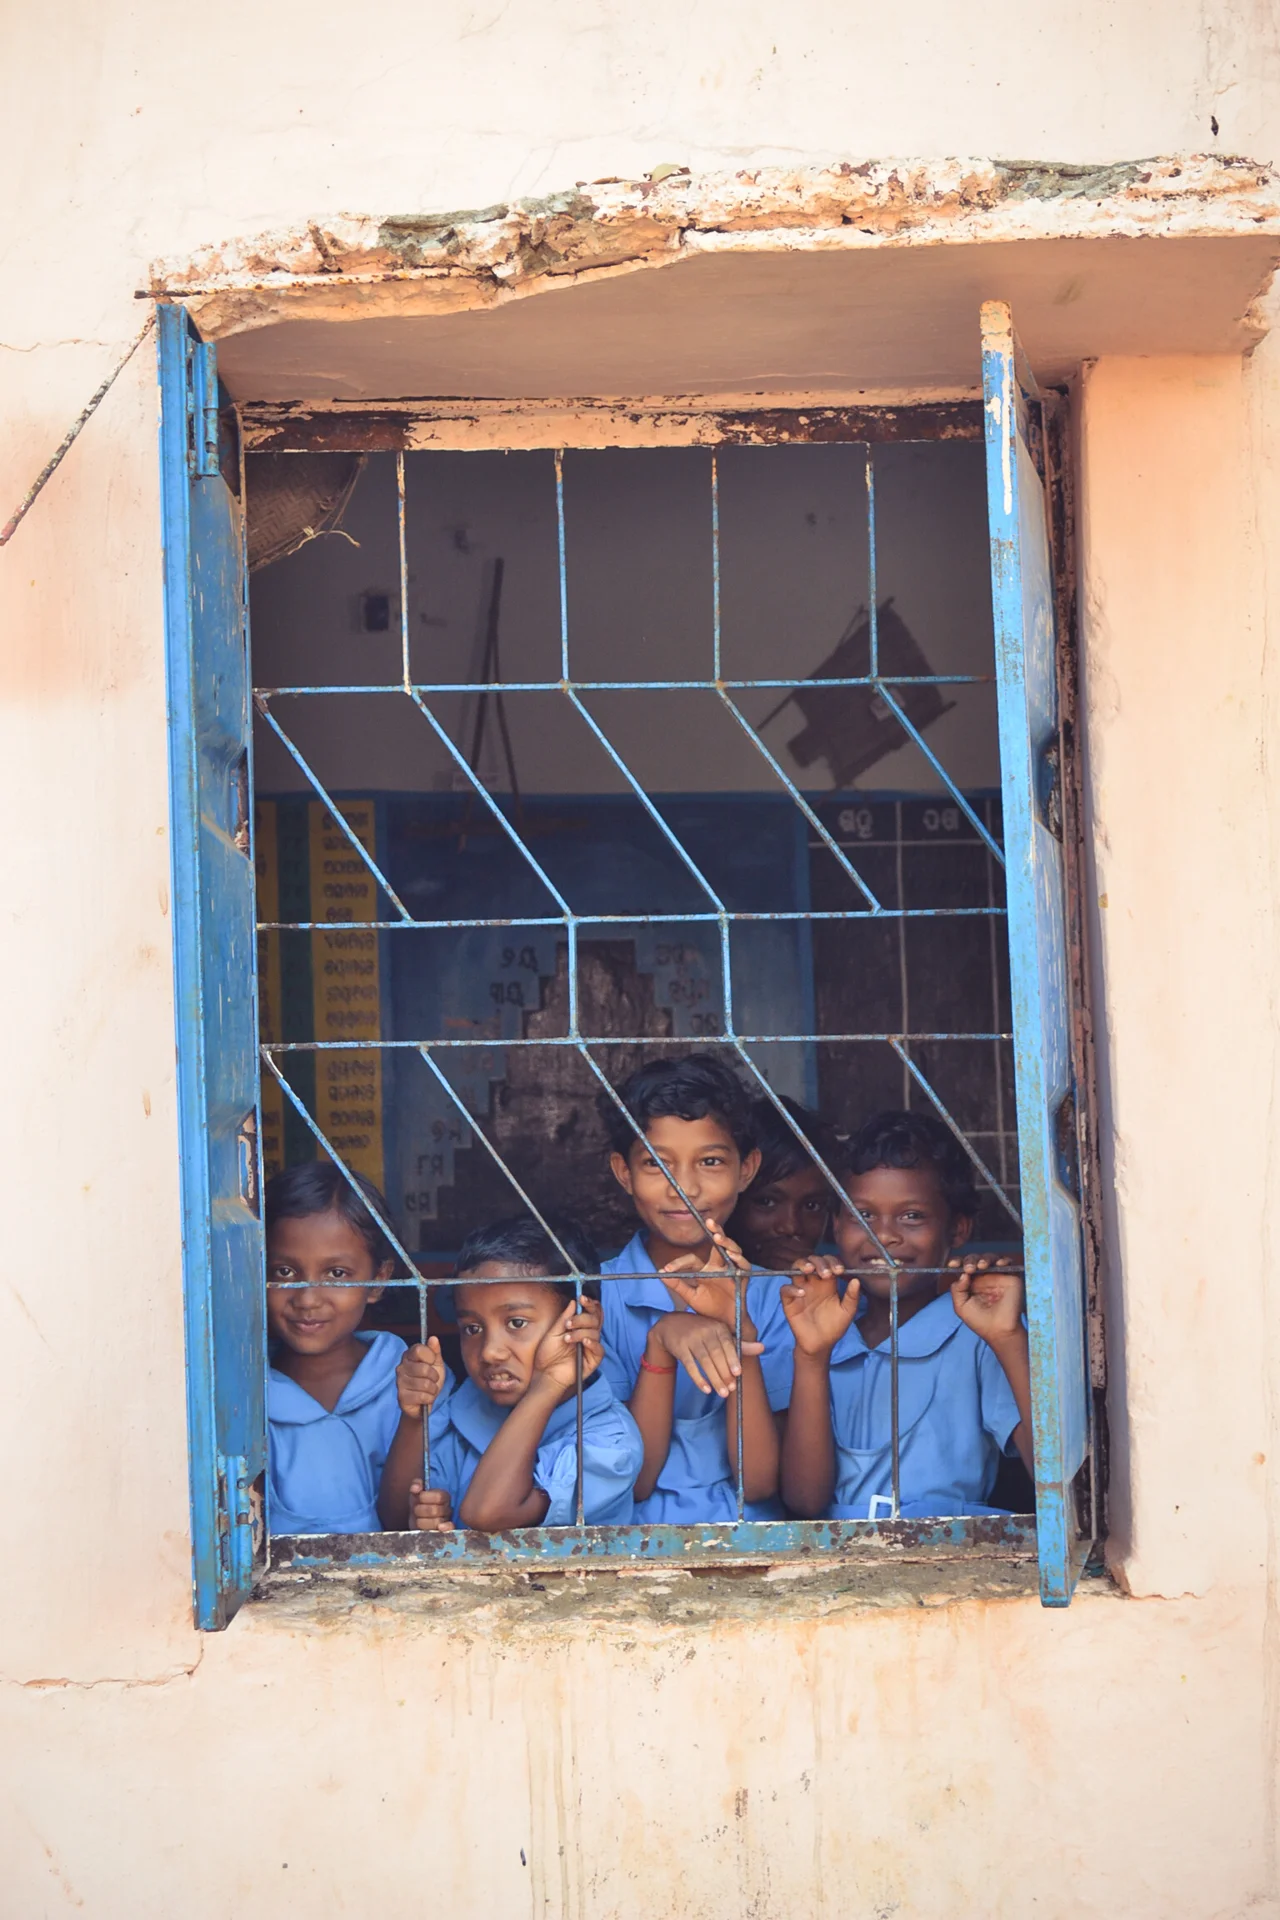 Photo of school children in uniforms, looking through a window, Sabre Education